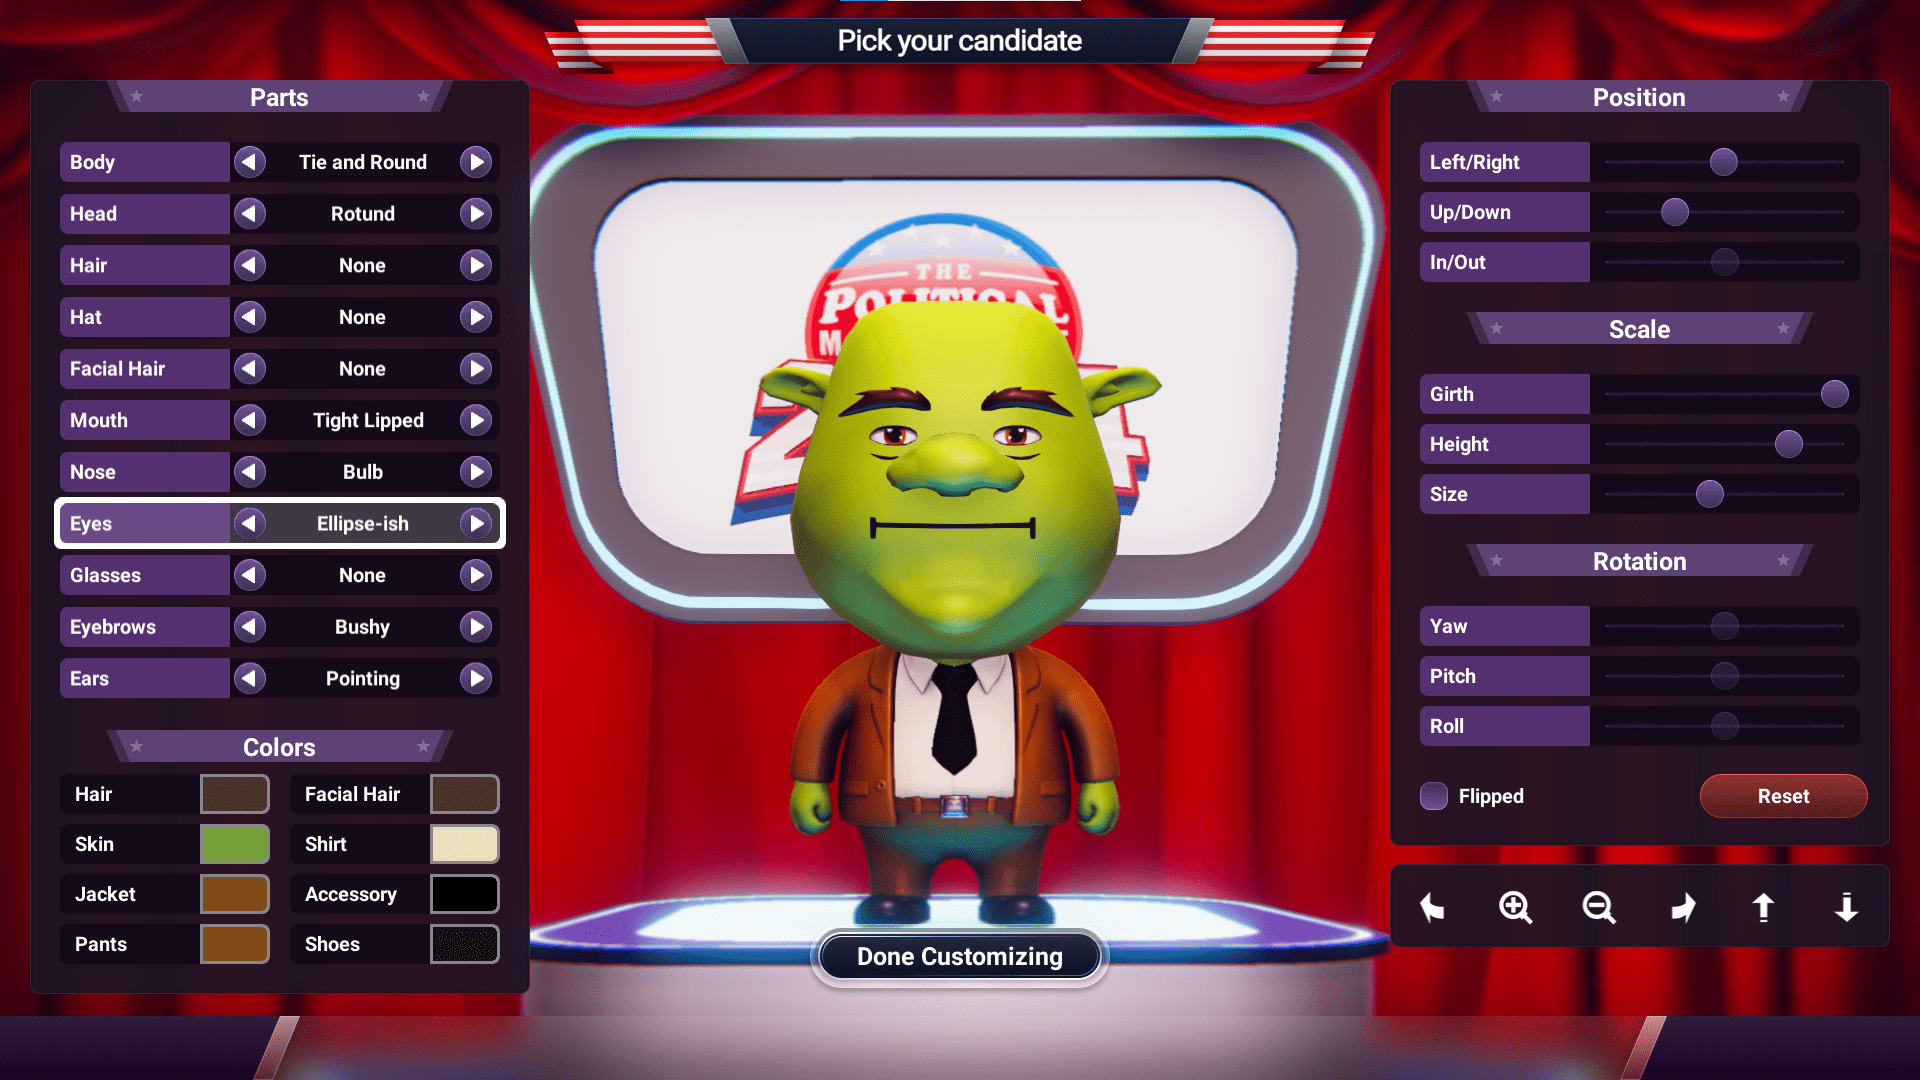 Create your own custom candidate and put up a fight for the White House! A familiar green ogre joins the race.